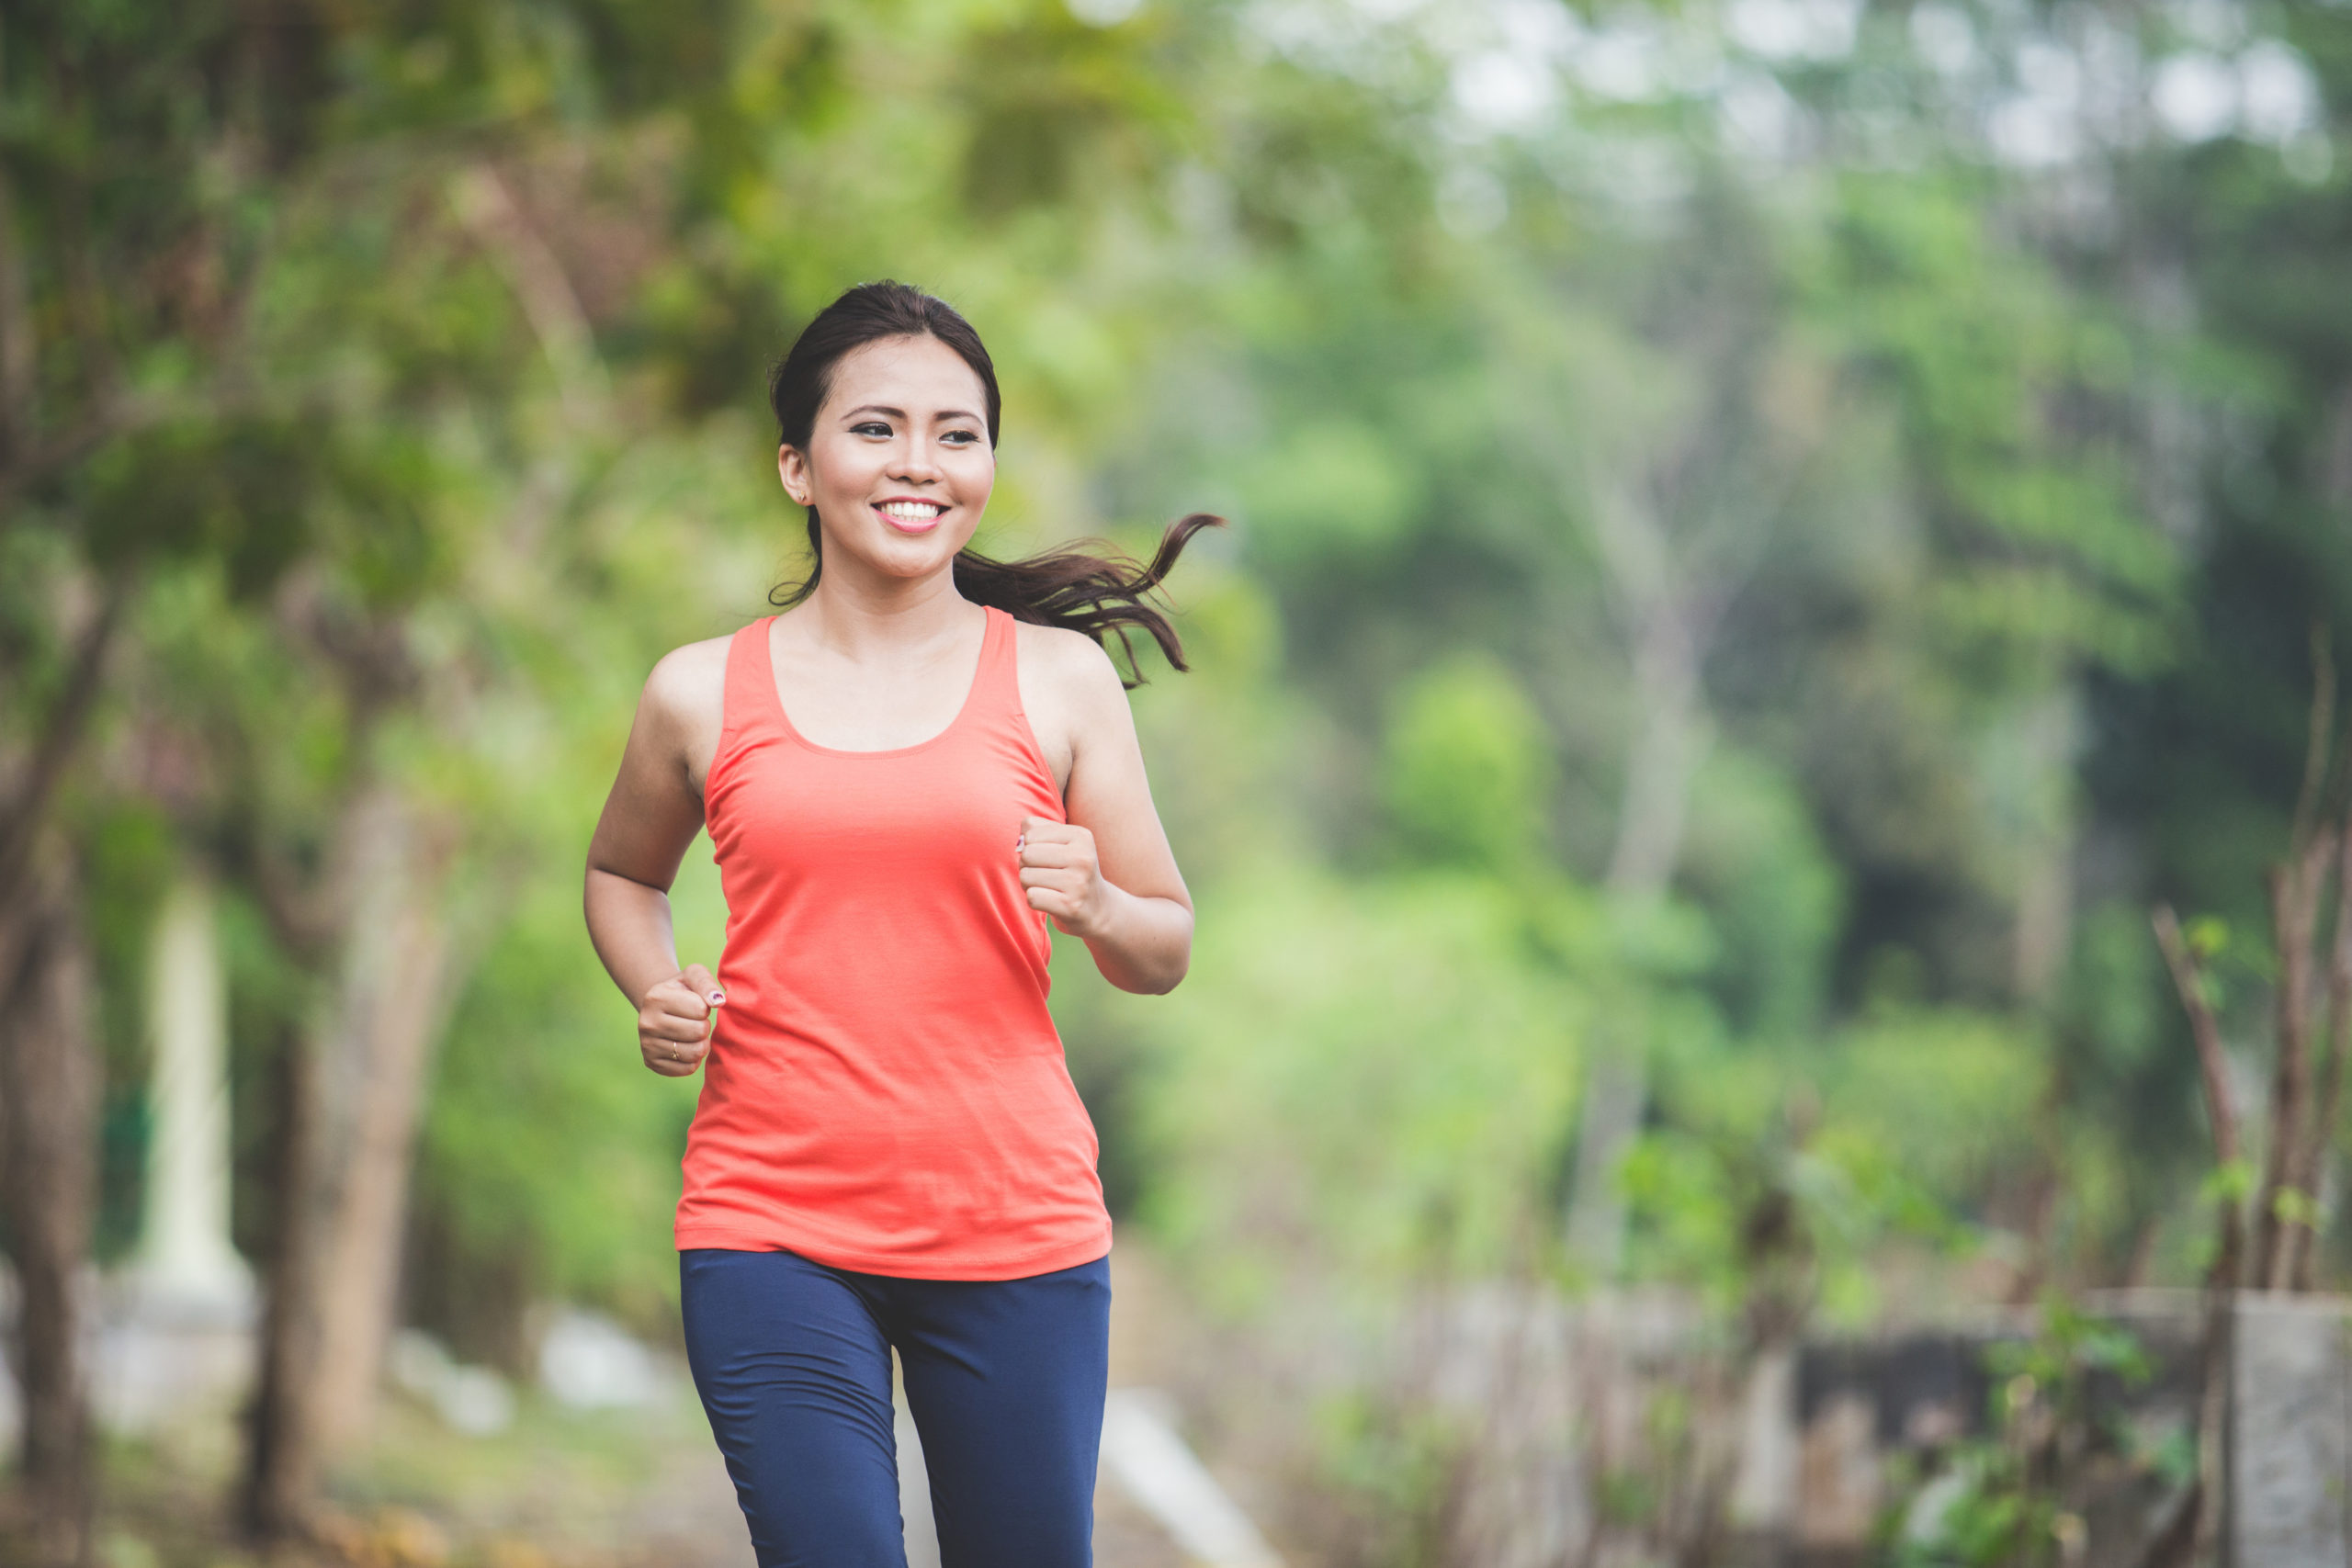 ways that physical exercise benefits mental health